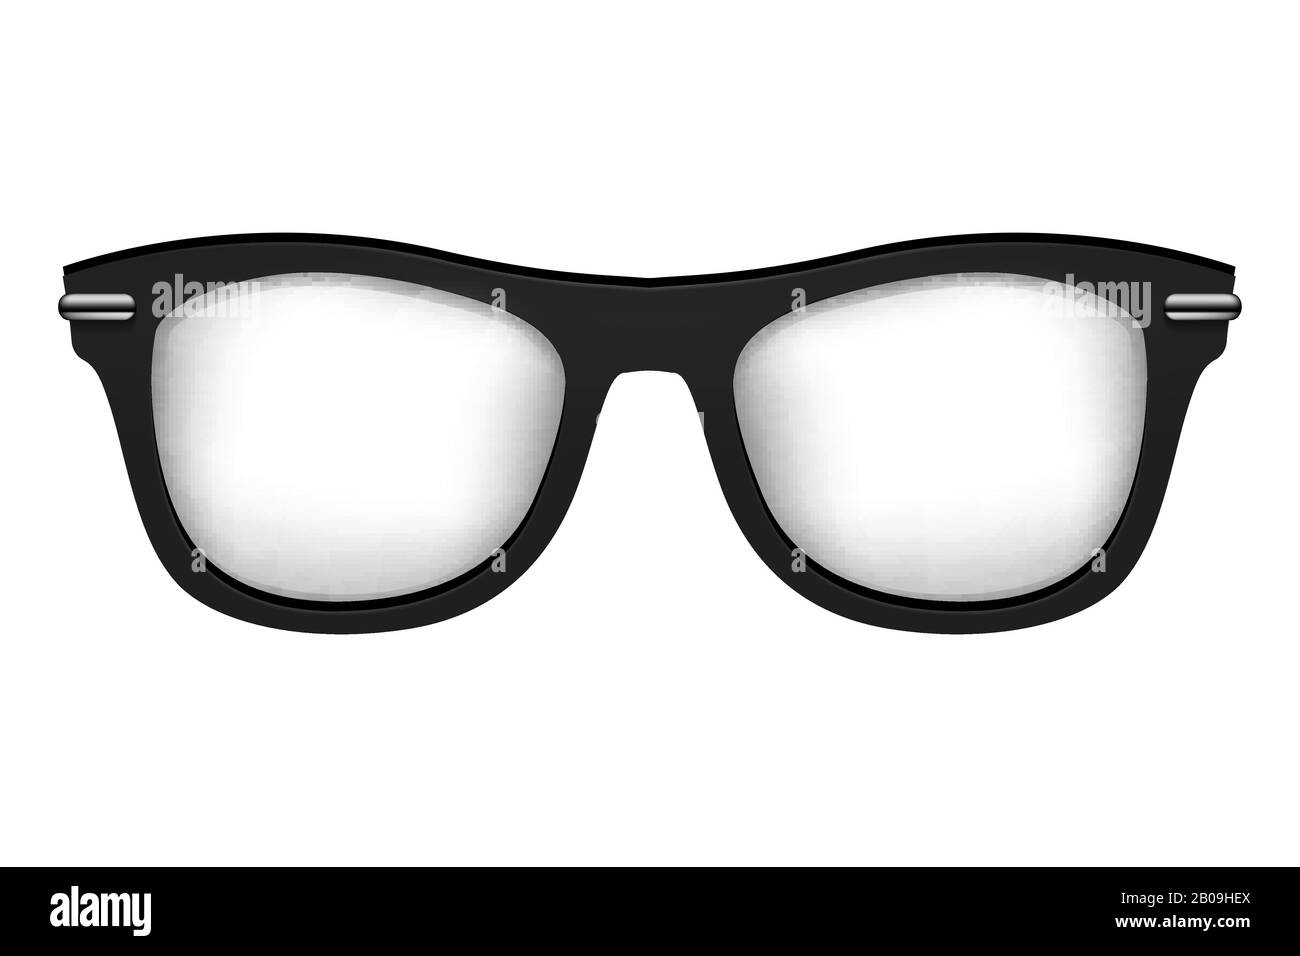 Realistic vector glasses in black white. Fashion glasses isolated illustration Stock Vector